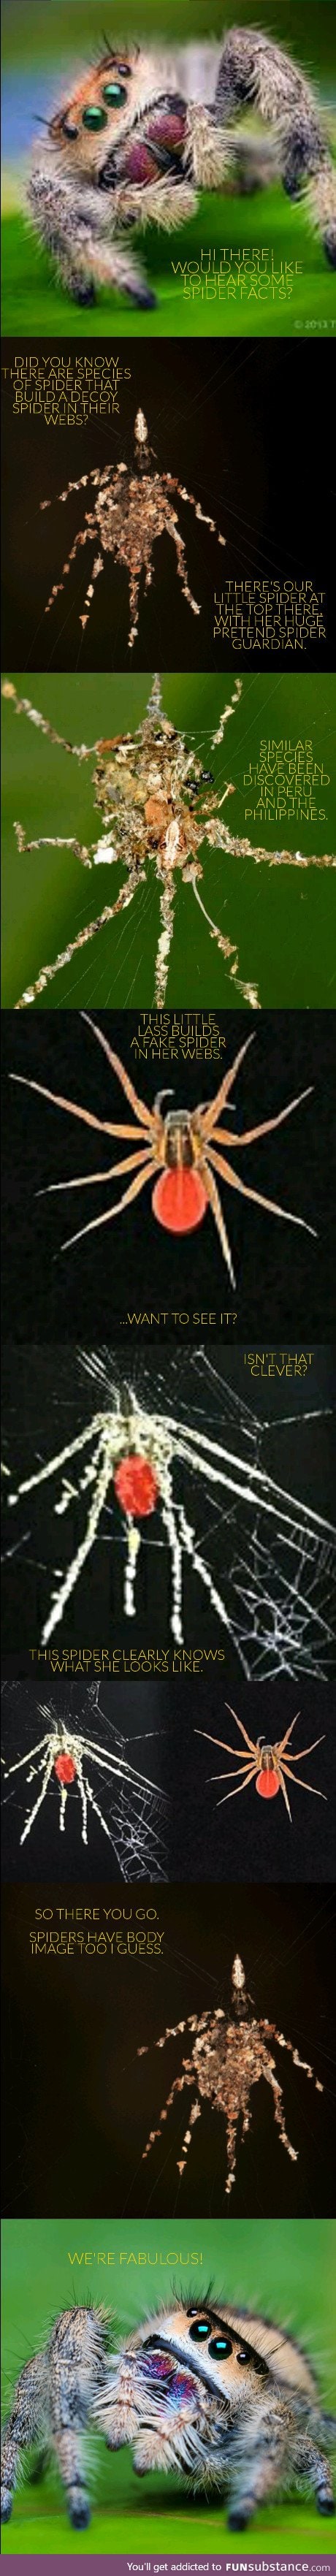 Interesting spiders fact